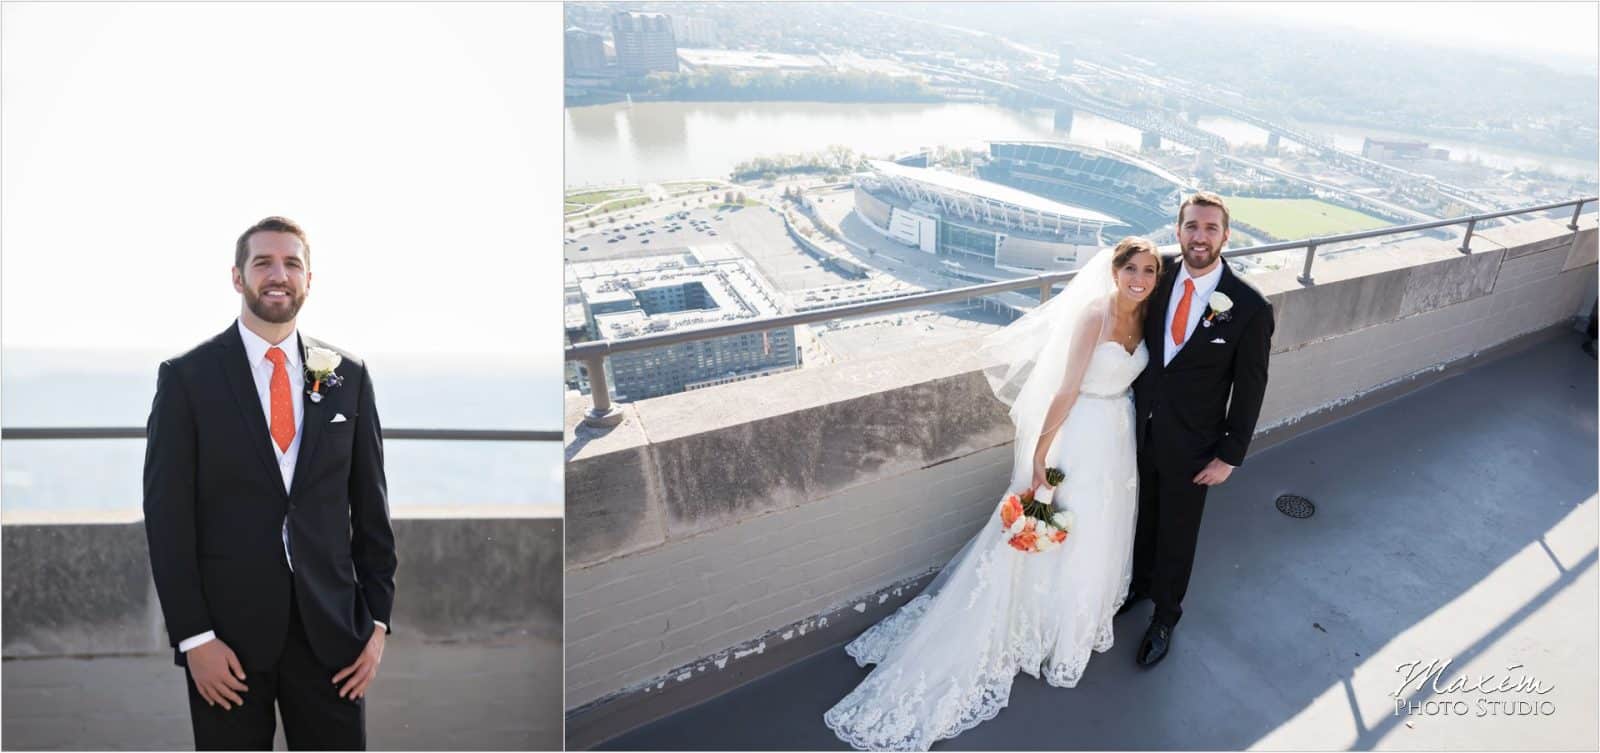 Carew Tower wedding first look bridal pictures